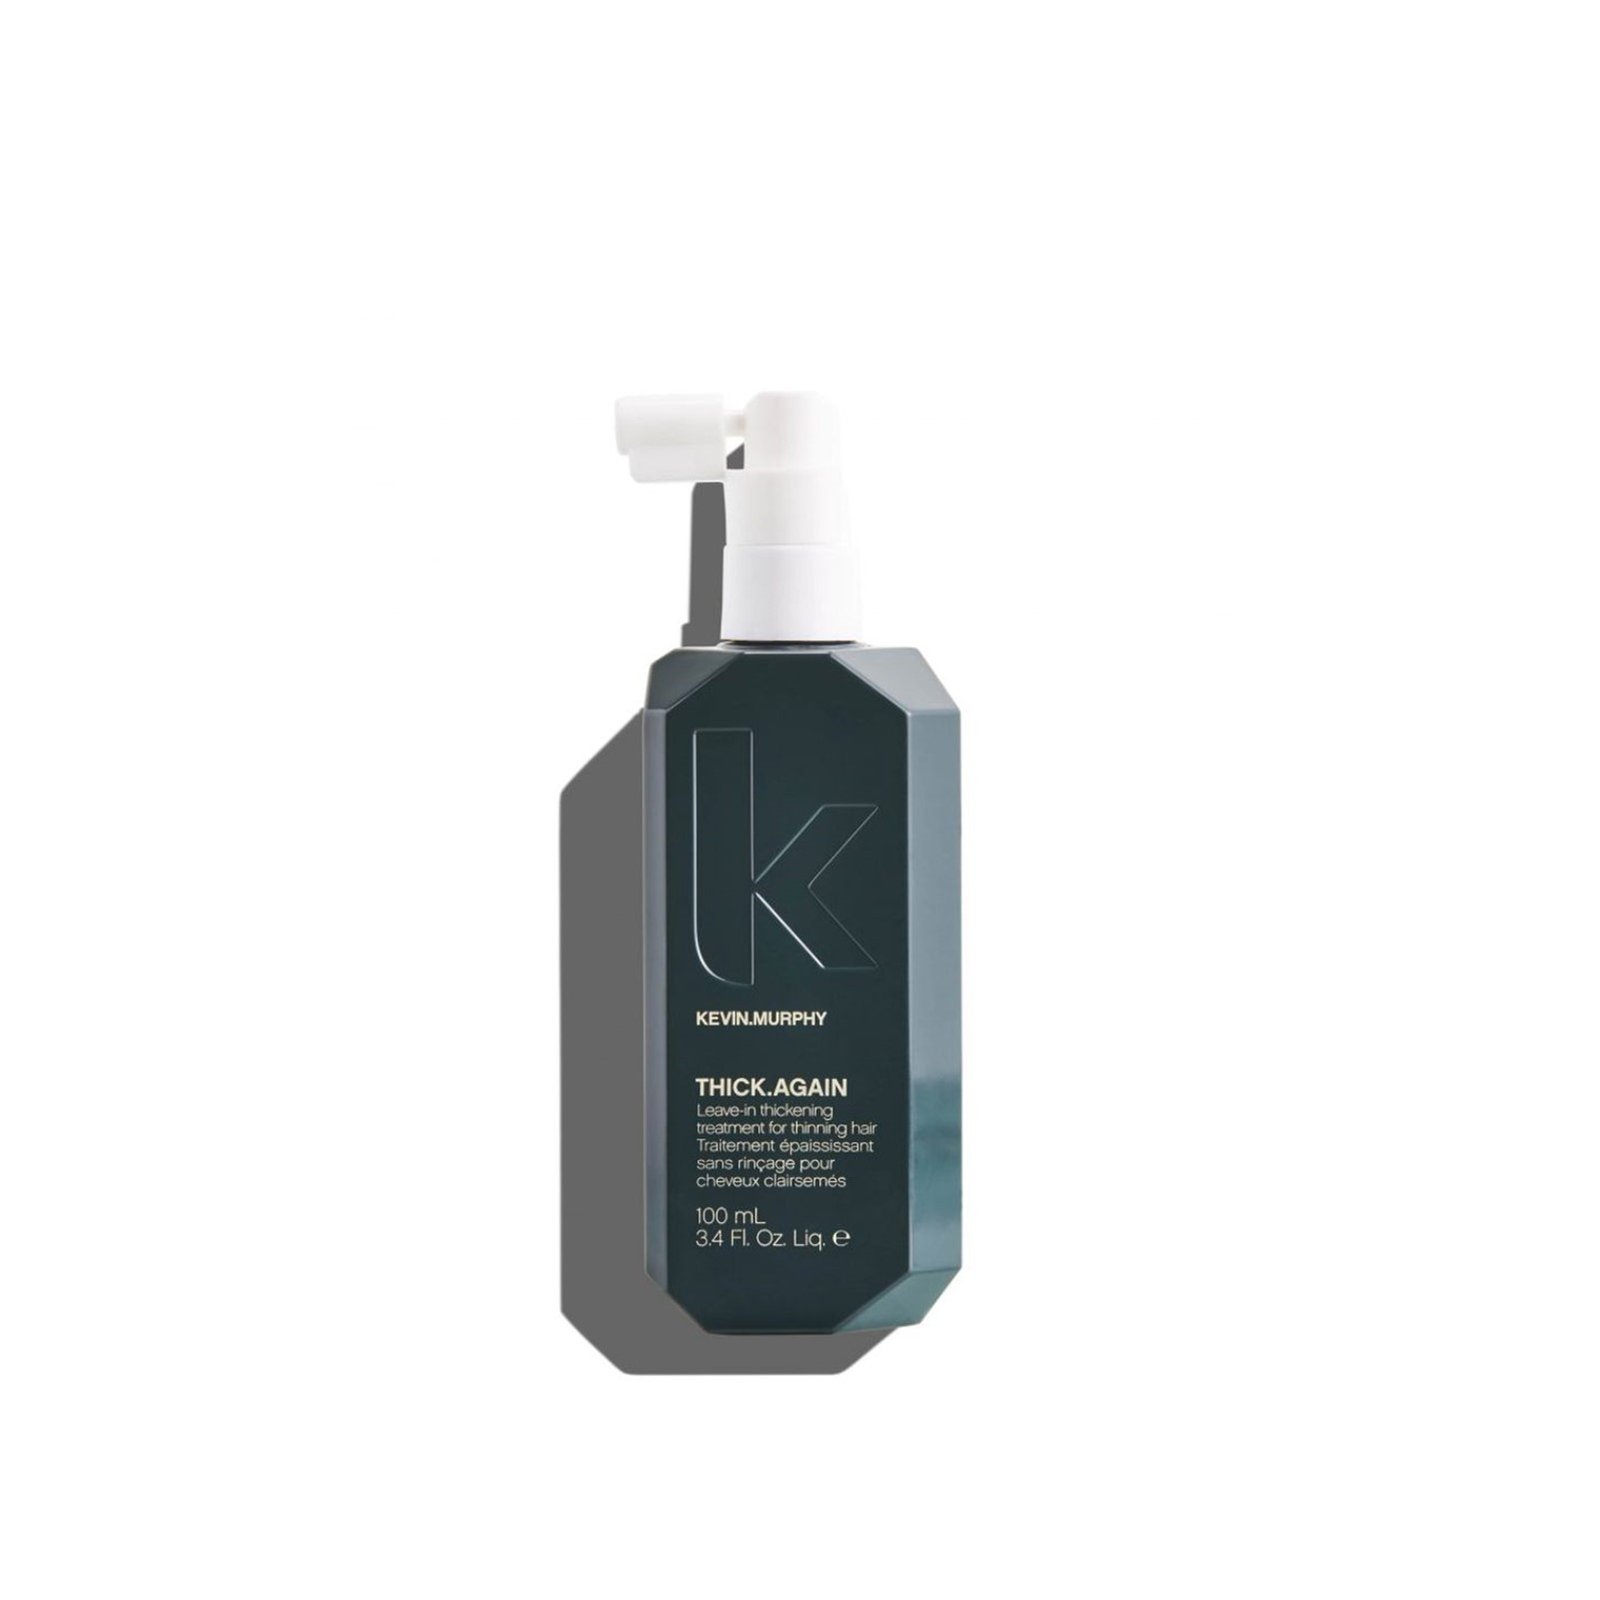 Kevin Murphy Thick Again Leave-In Treatment 100ml (3.4 fl oz)